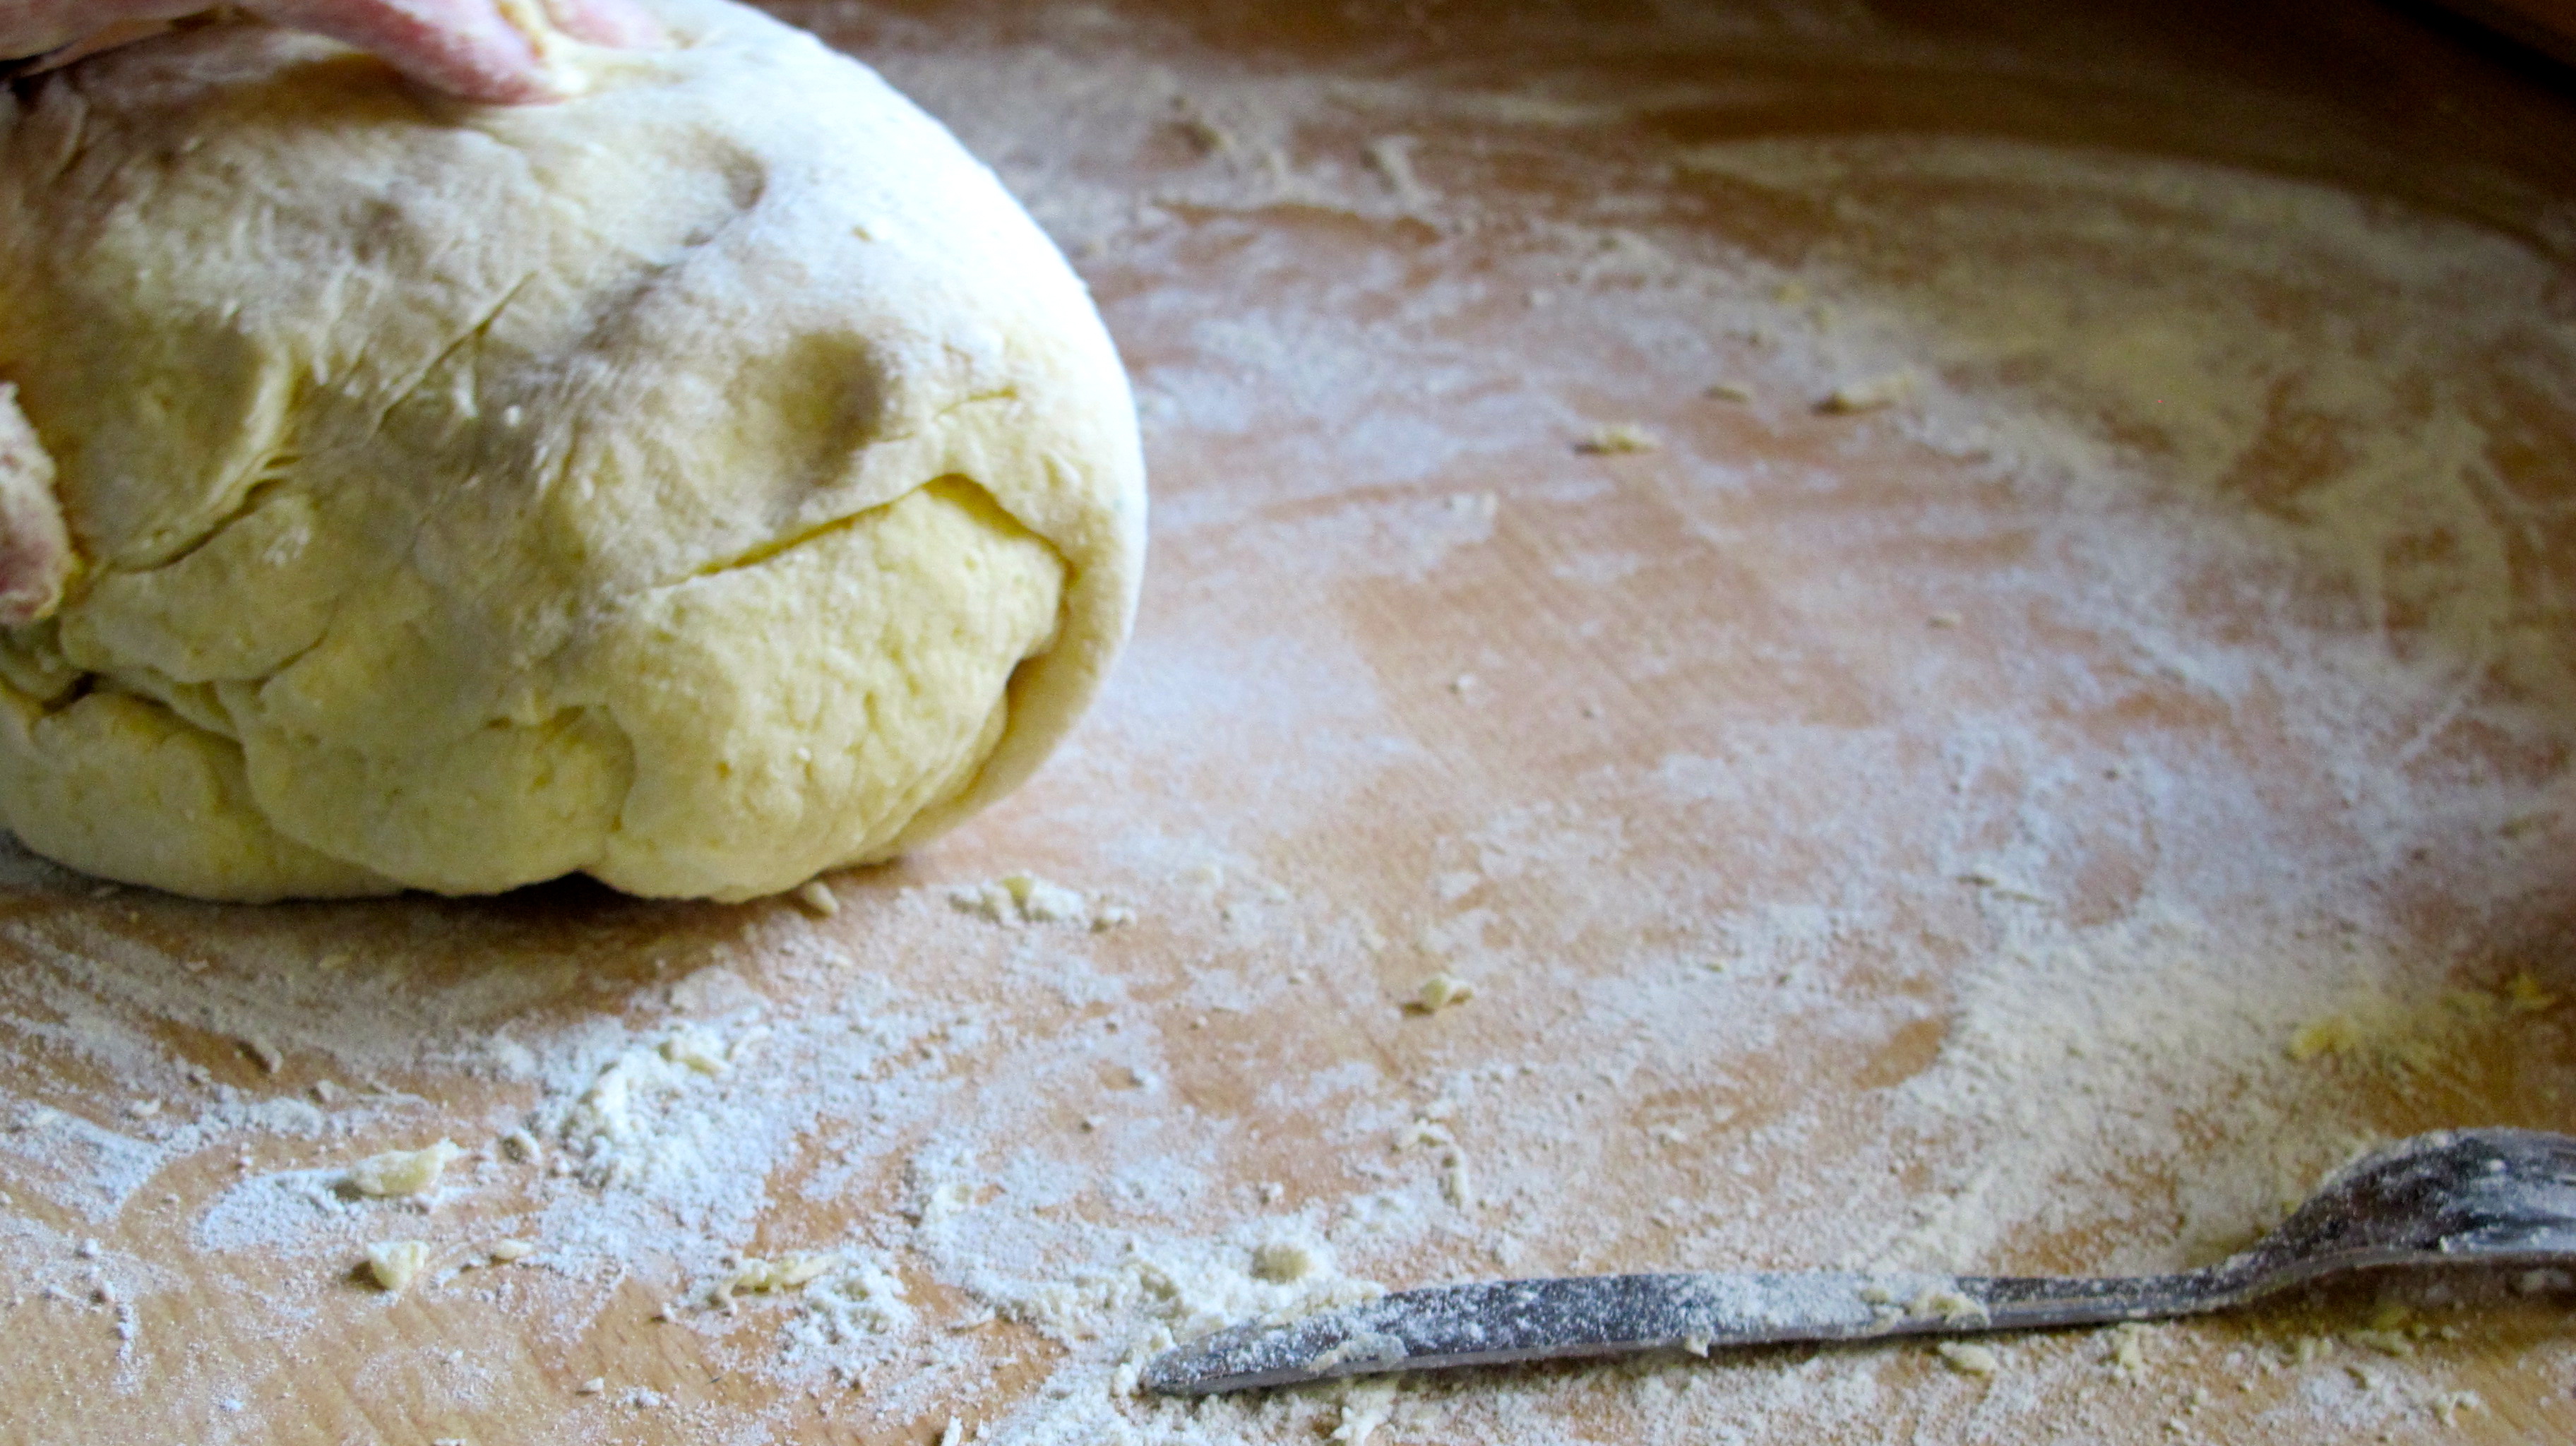 The dough is formed into a ball. 